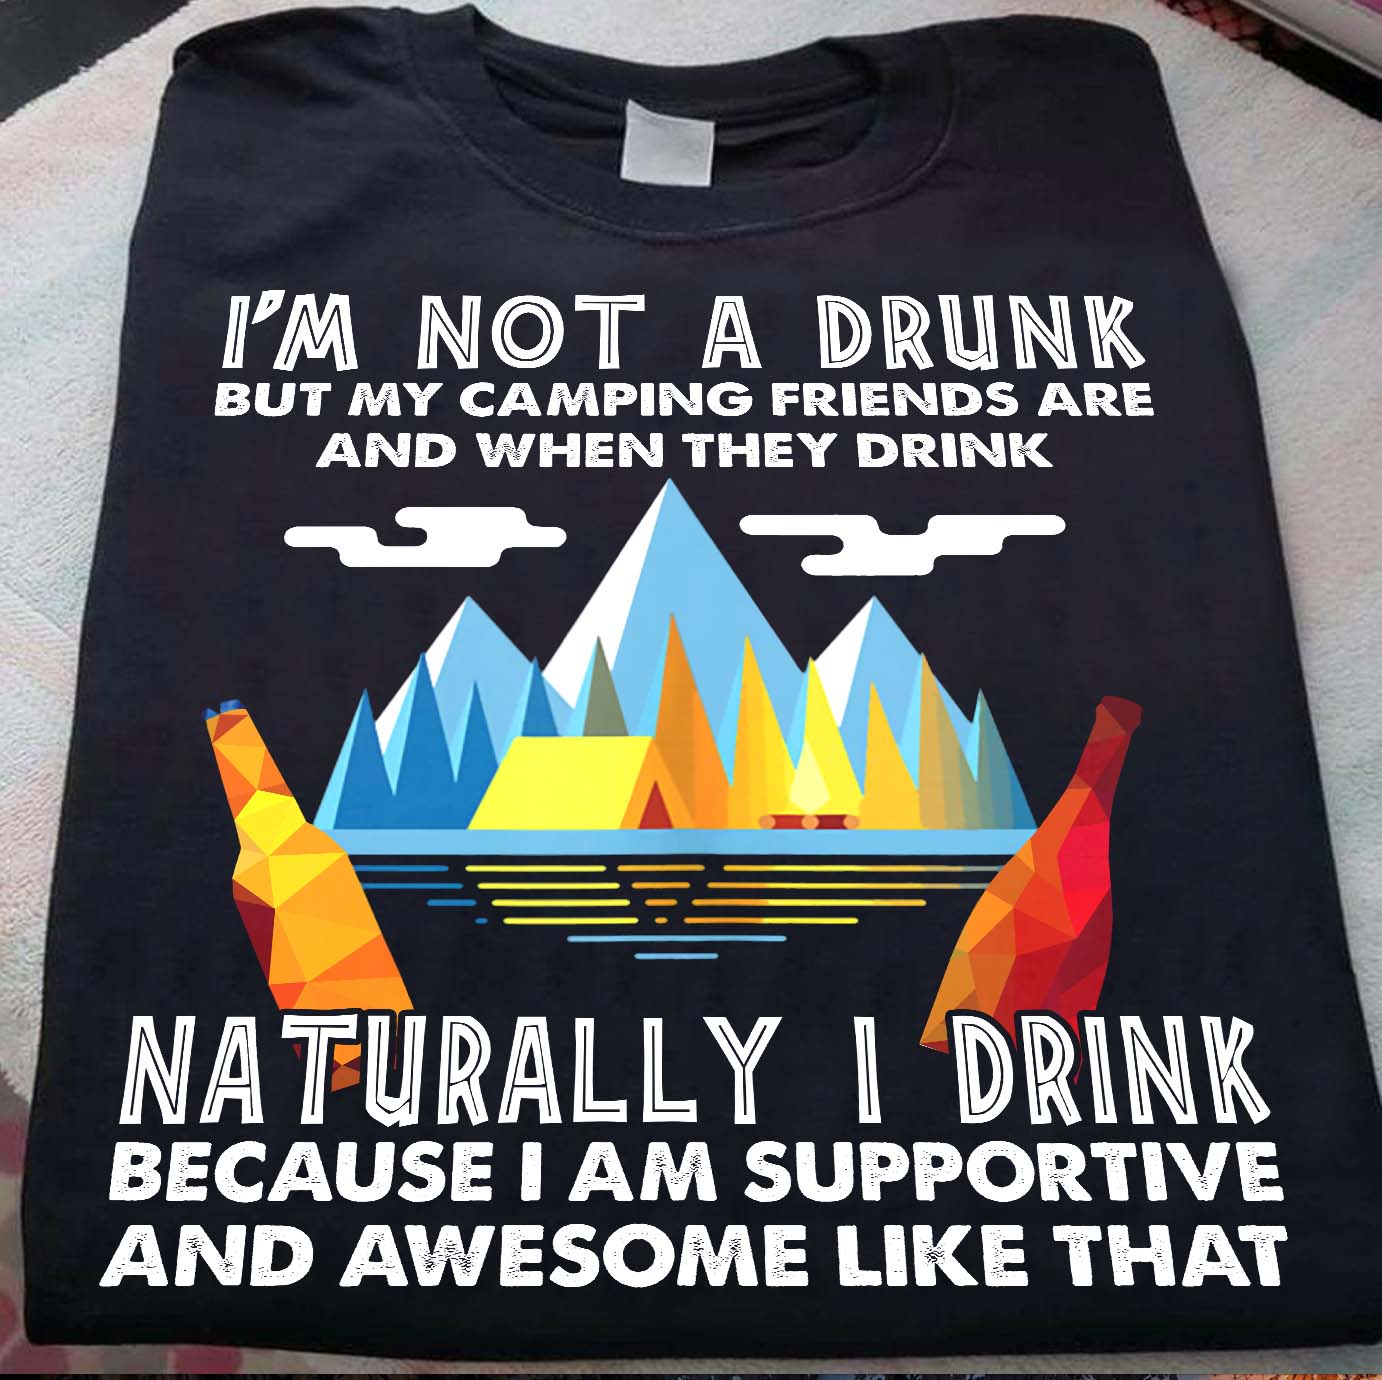 I'm not a drunk but my camping friends are and when they drink naturally I drink - Camping lover